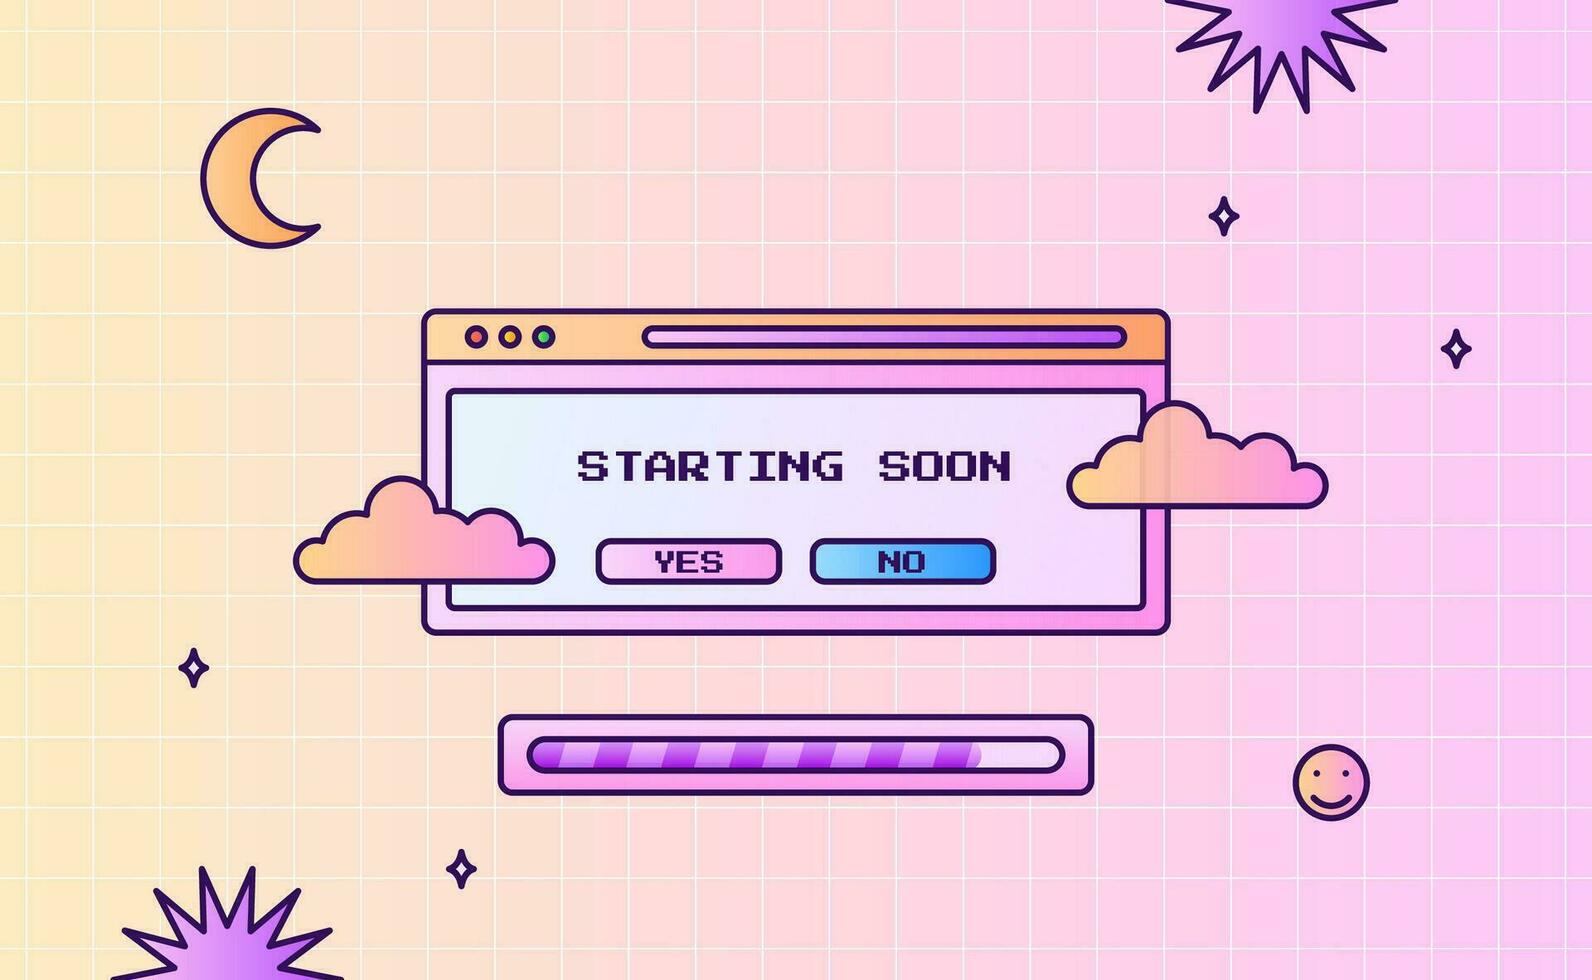 Stream starting soon offline screen ui layout modern pink purple gradient with cloud and window interface for gaming or streaming vector